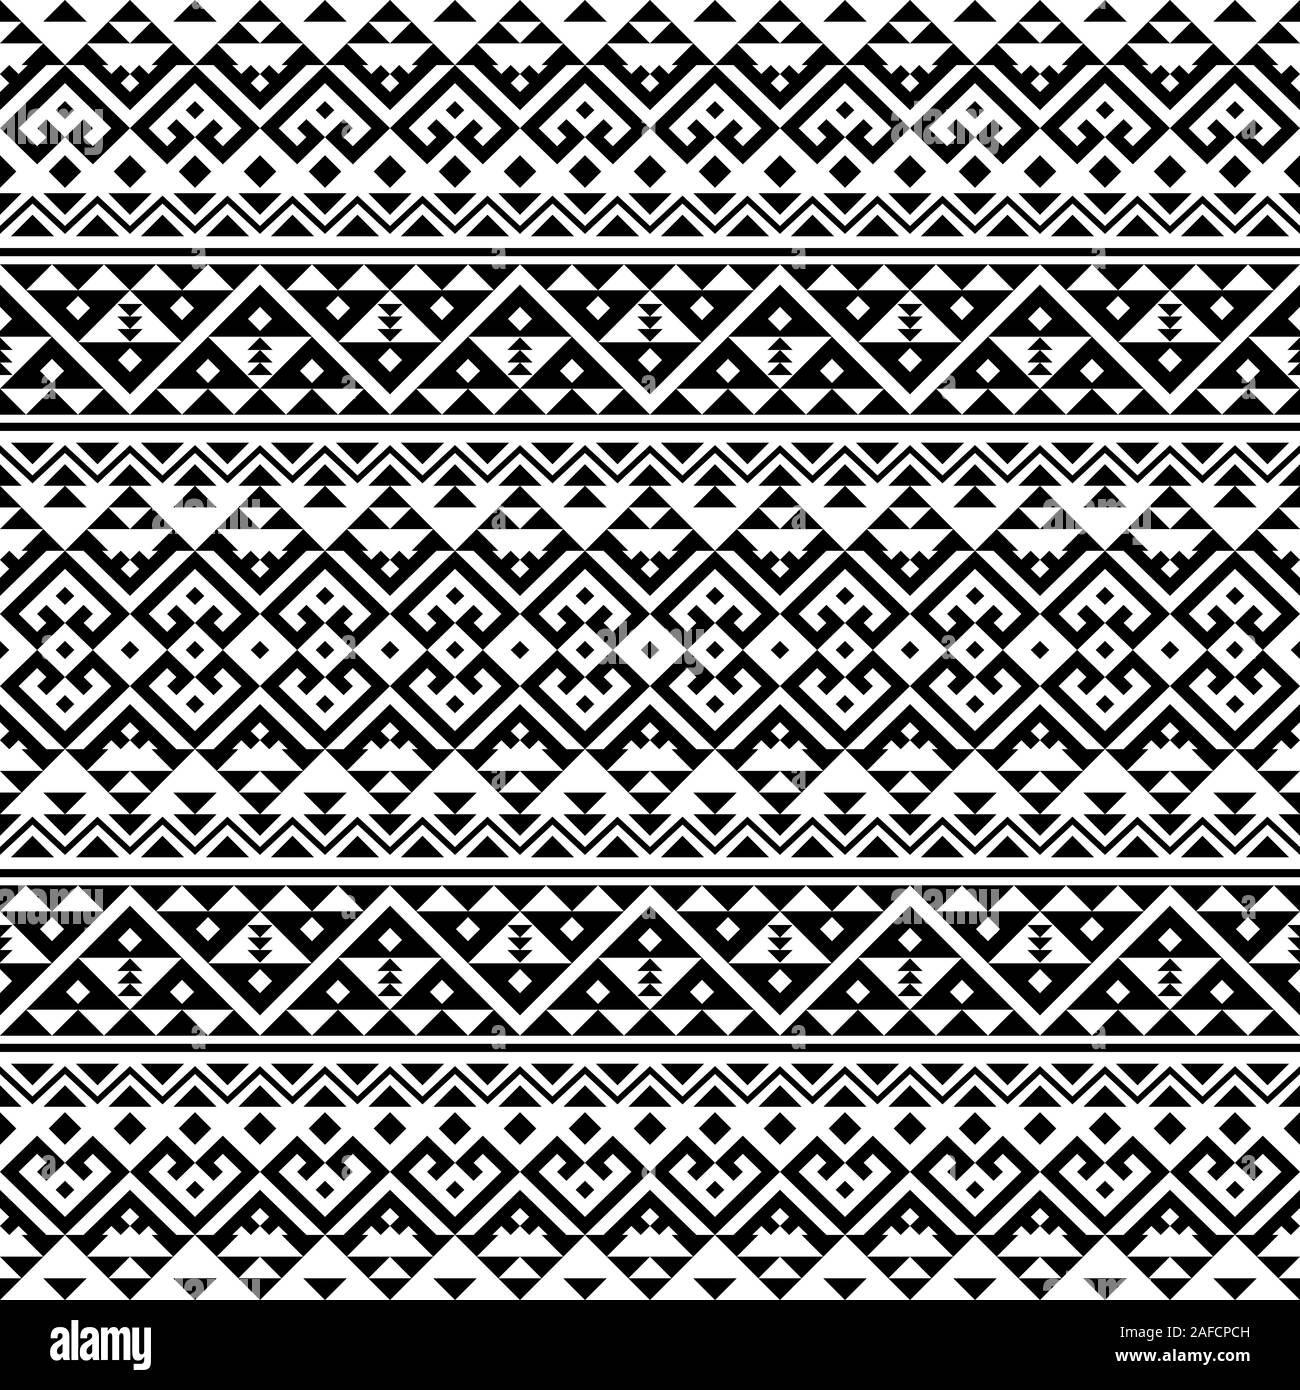 Seamless Ethnic Pattern in black and white color. Black White Tribal ...